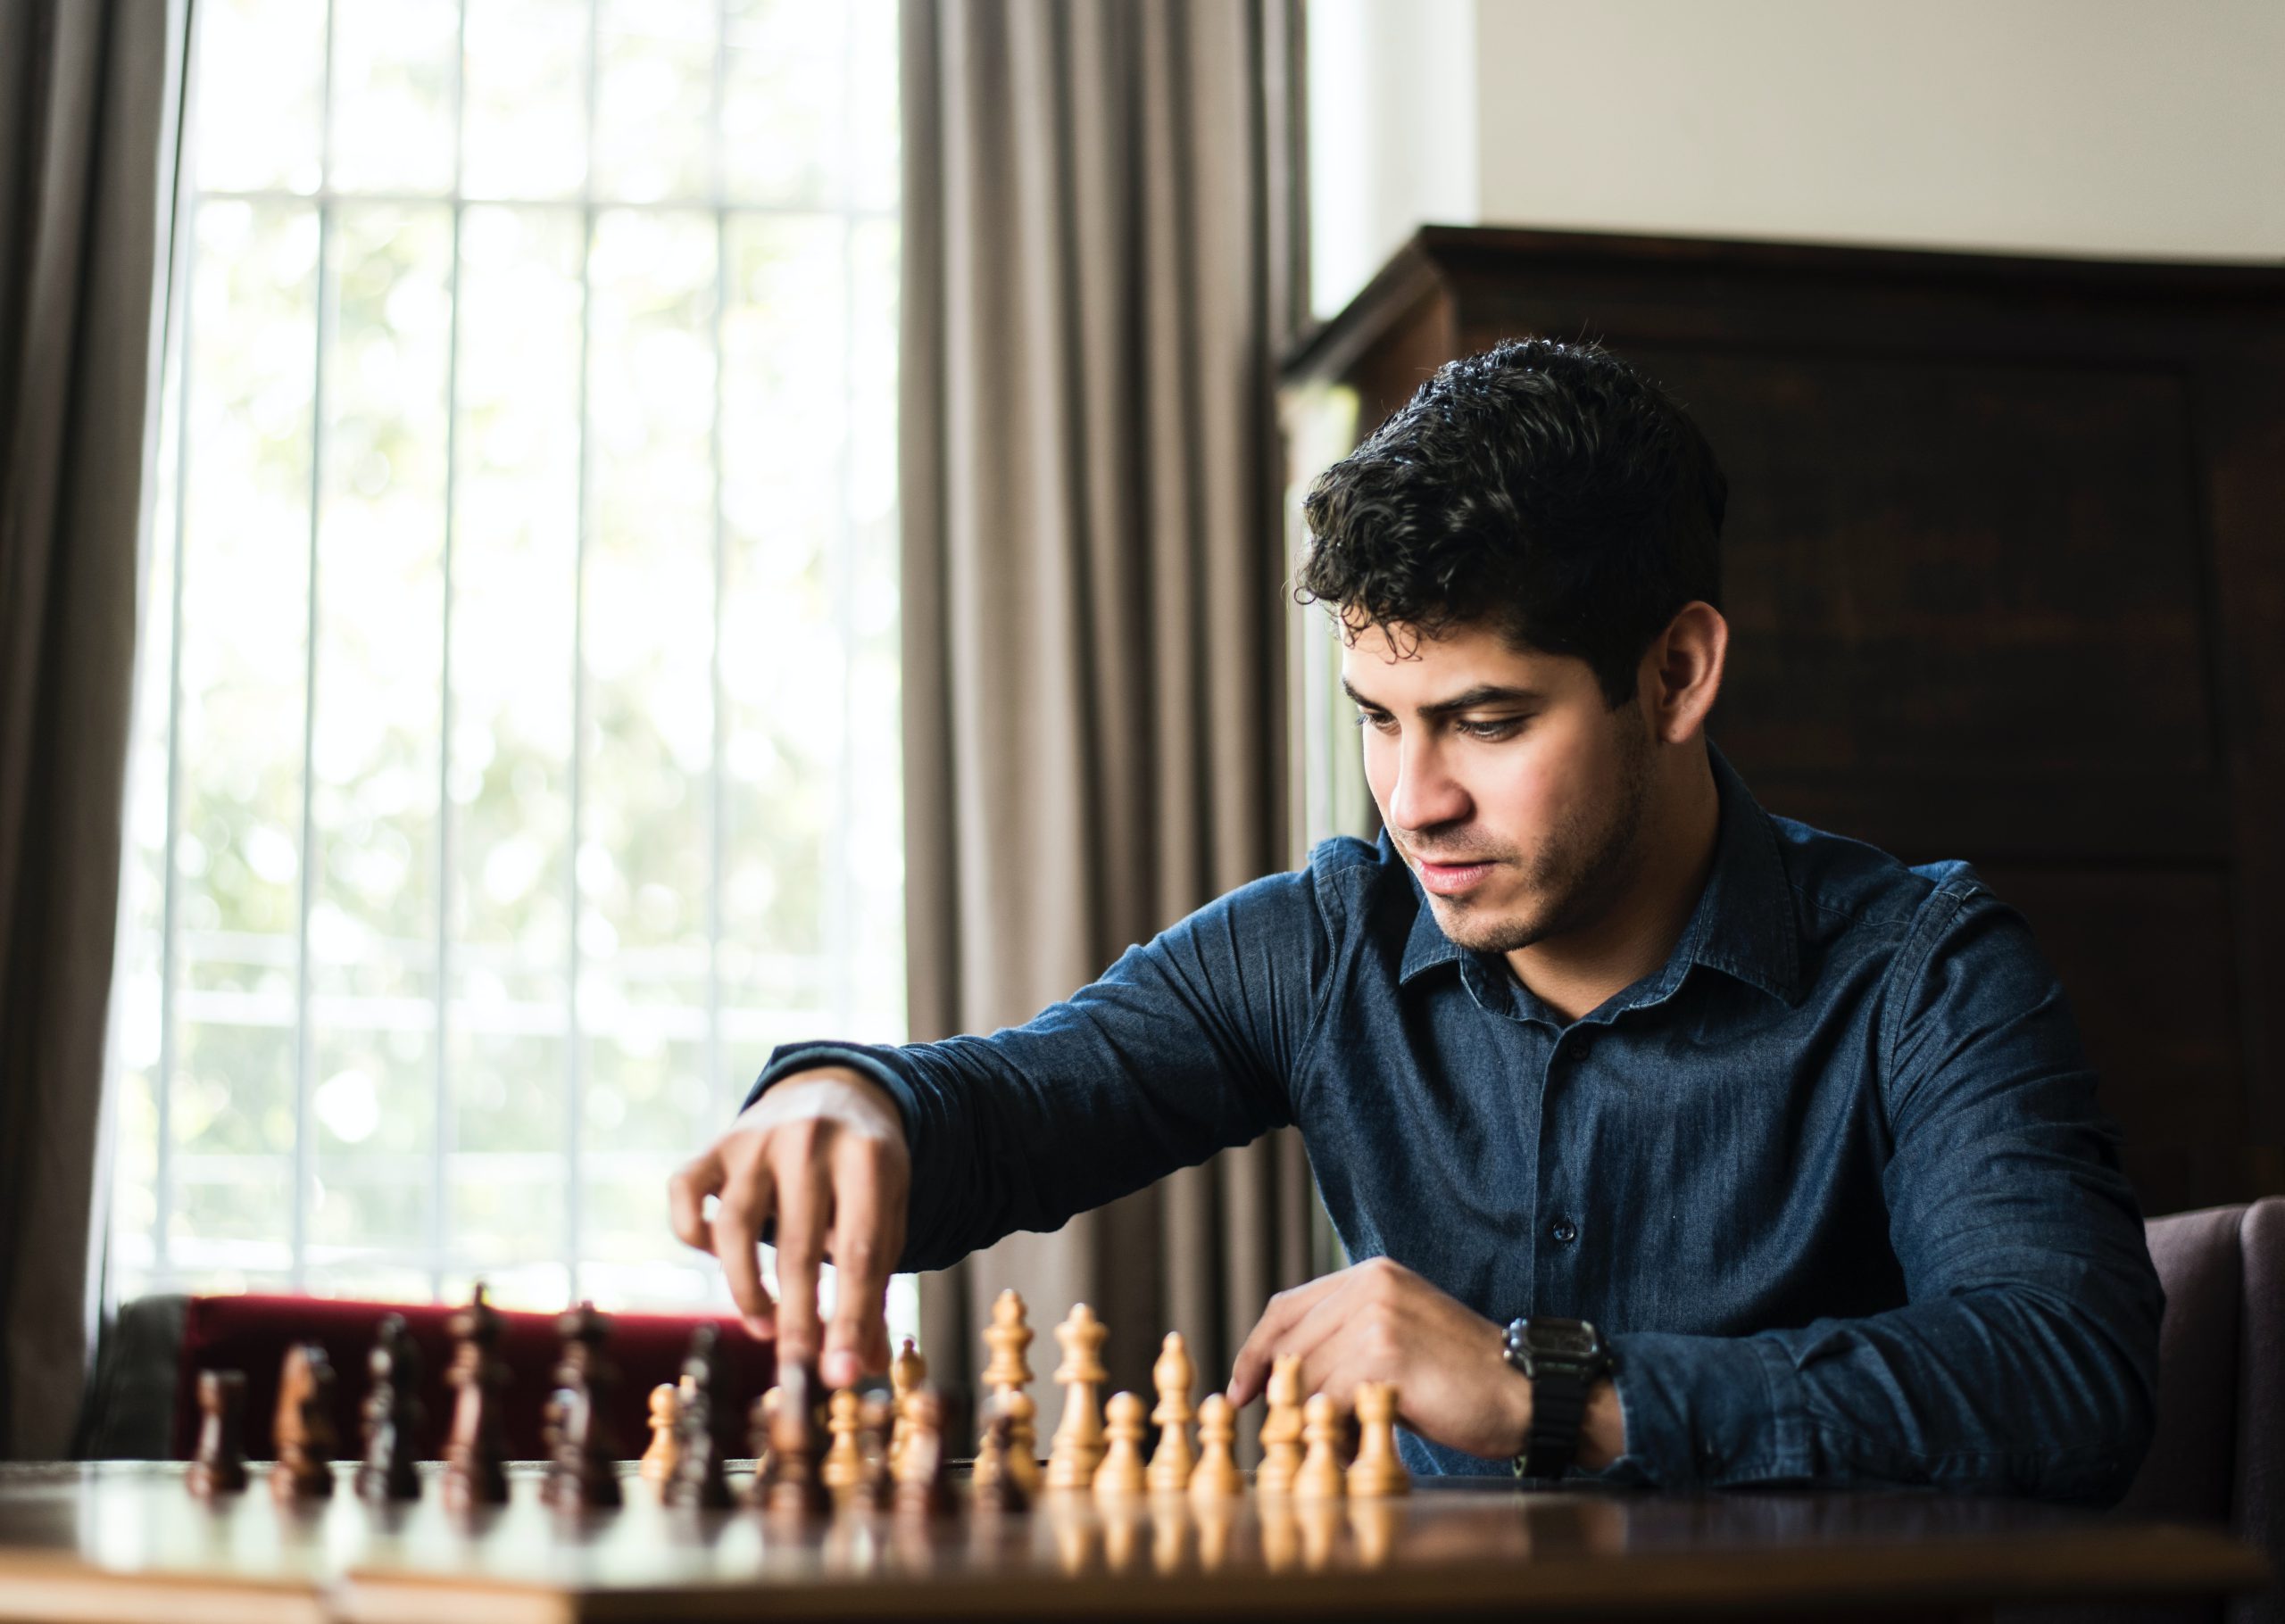 How To Earn A Living Playing Chess 